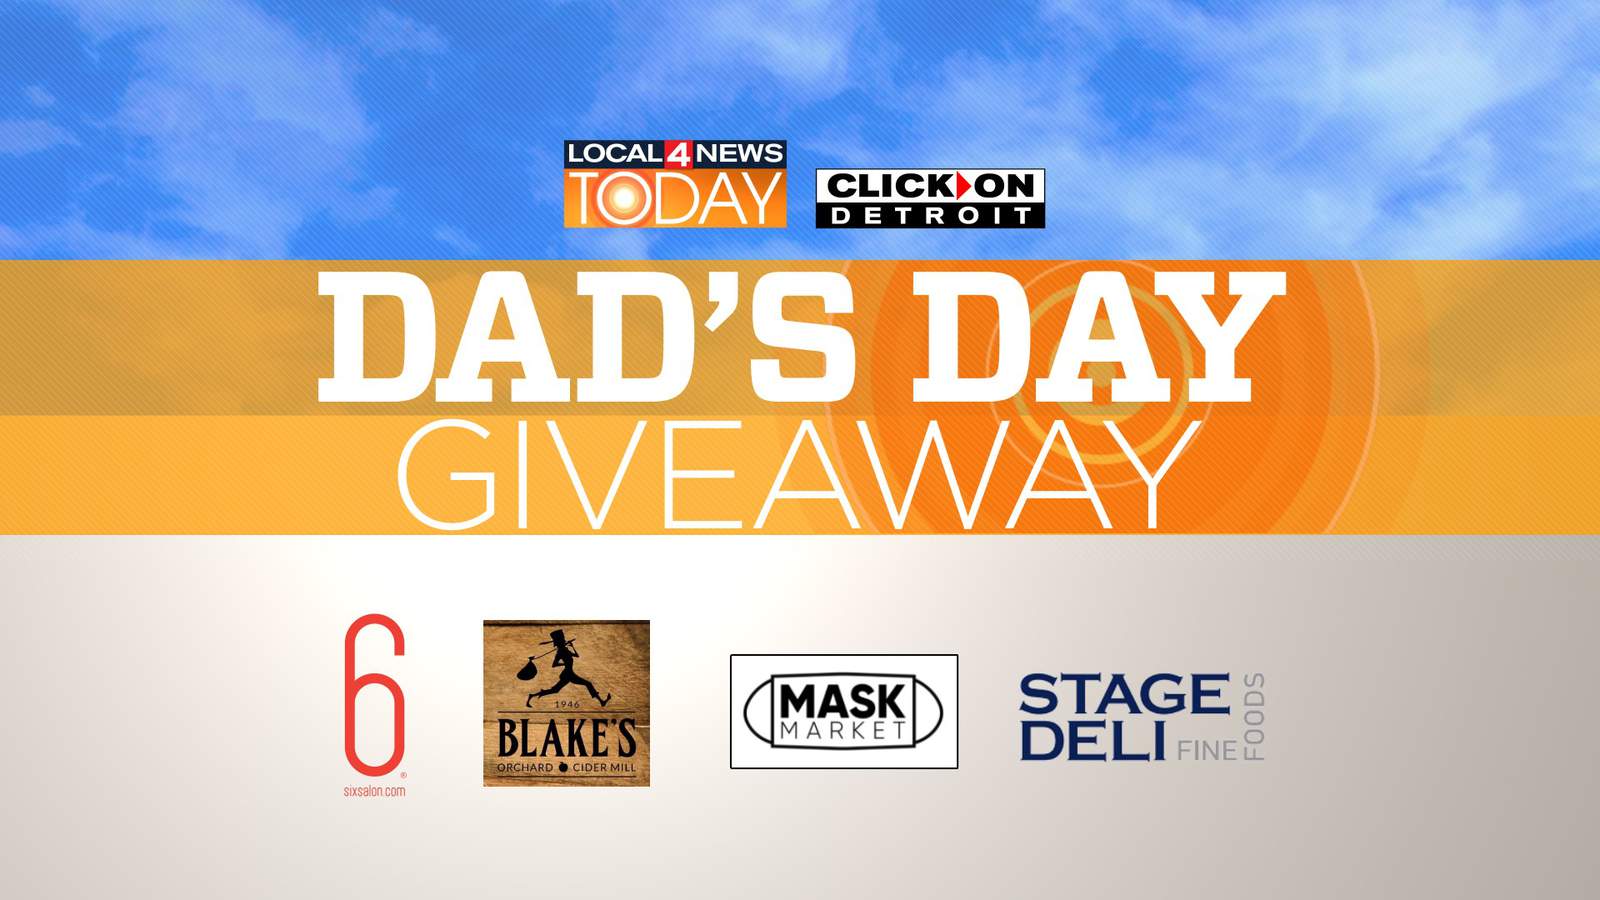 Fathers Day giveaway: Tell us what makes him great